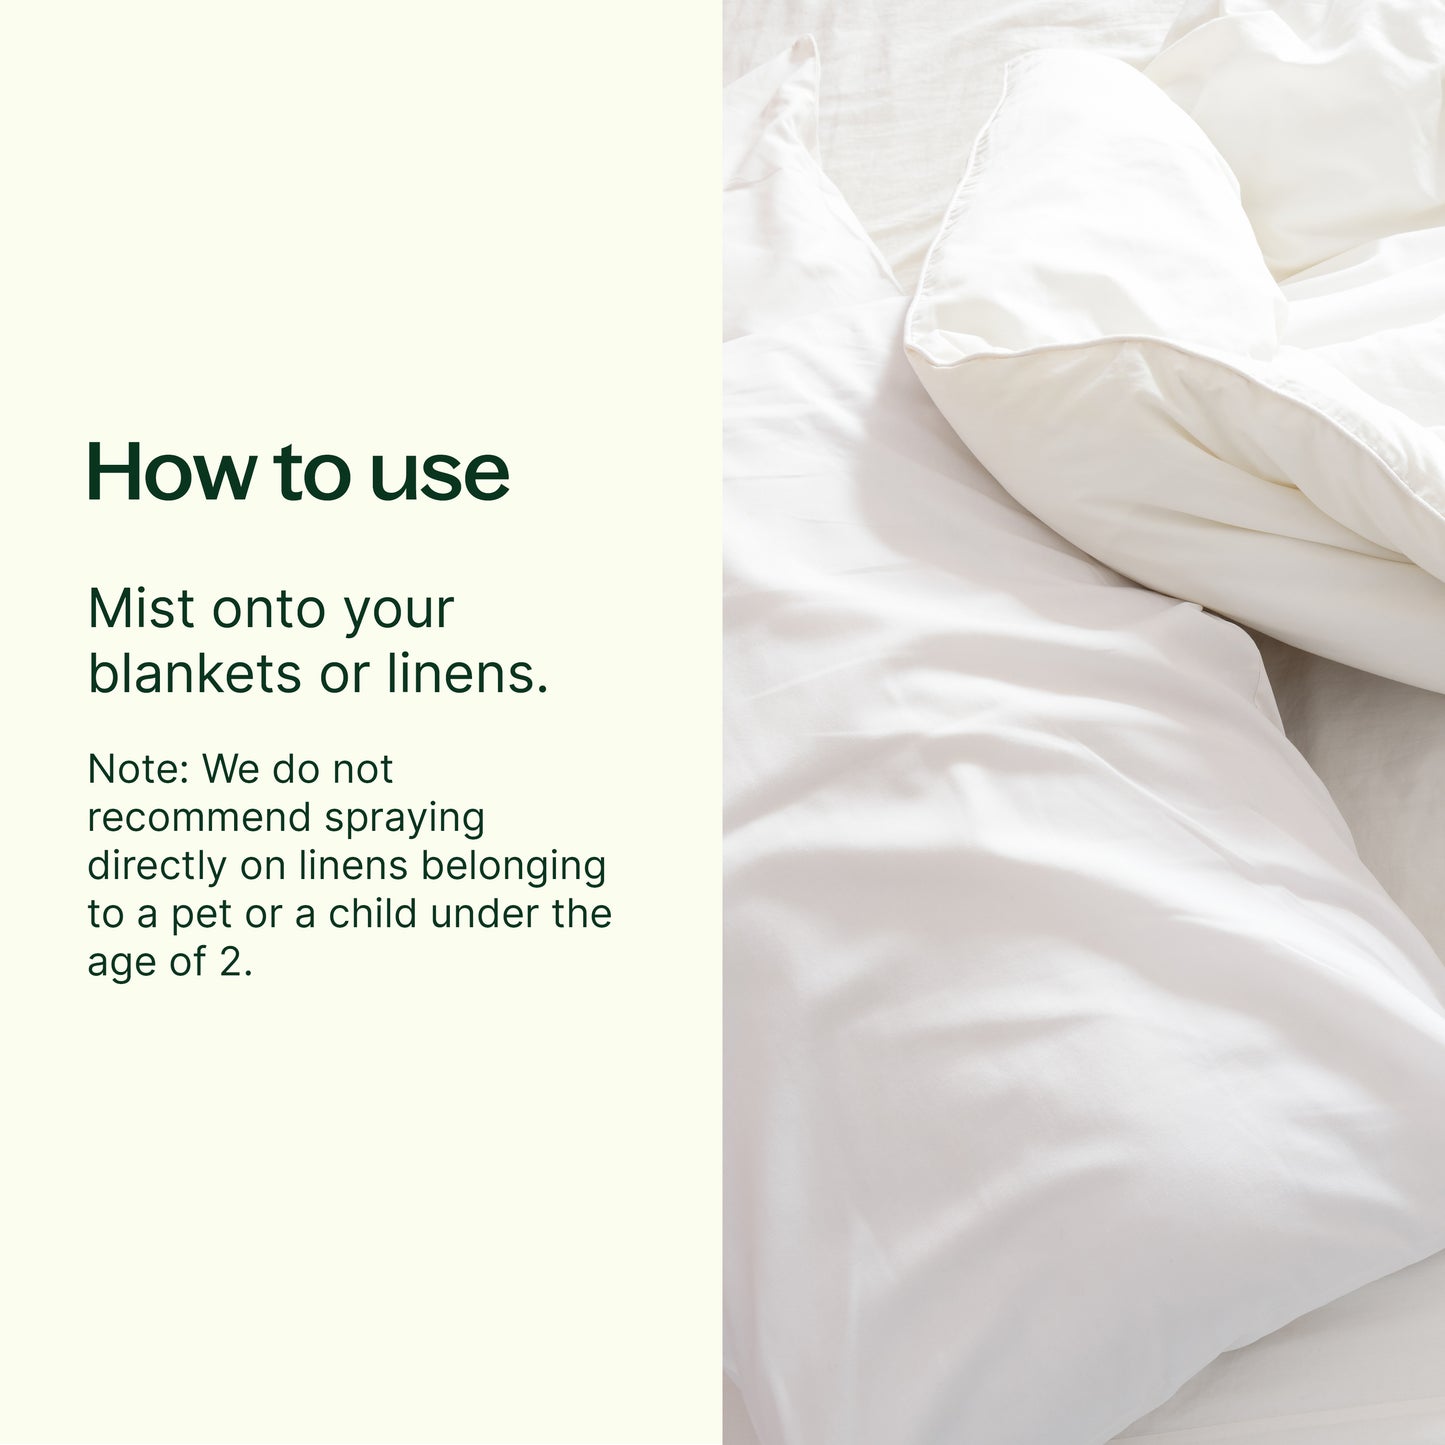 how to use: mist onto your blankets or linens. Note: we do not recommend spraying directly on linens belonging to a pet or a child under the age of 2. 